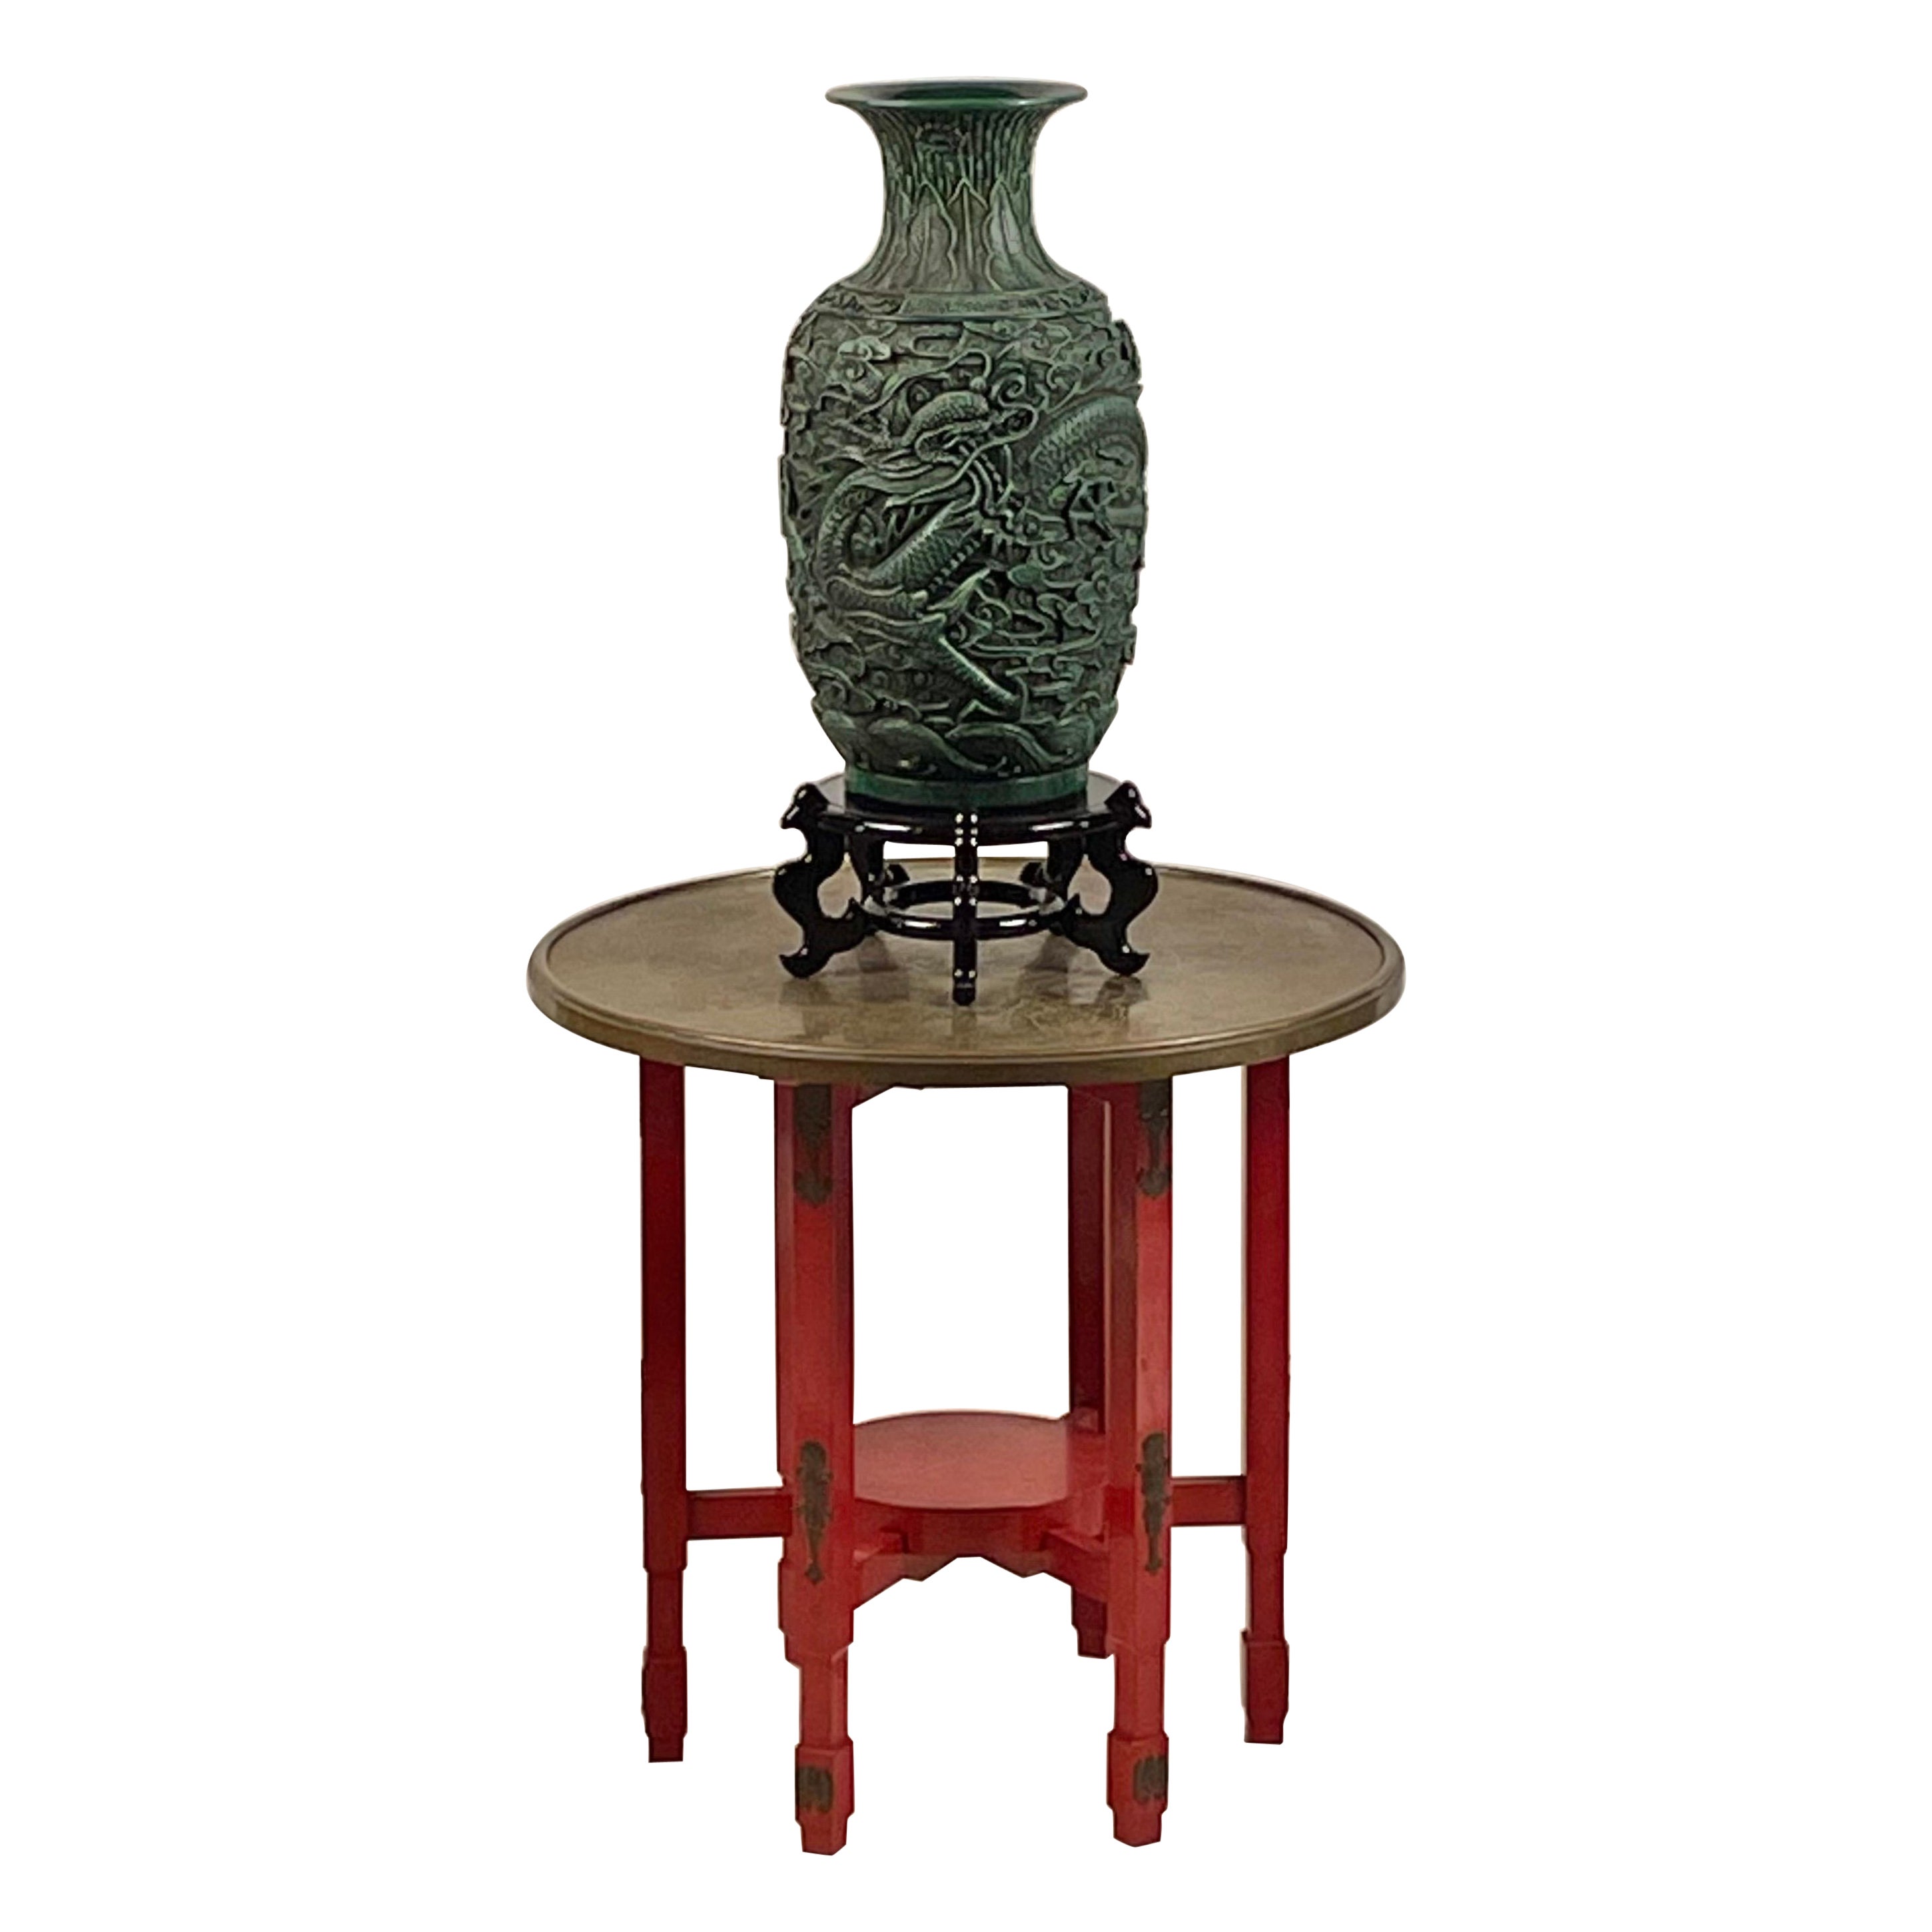 Chinese Lacquer and Bronze Table & Green Dragon Vase the Style of Tony Duquette For Sale